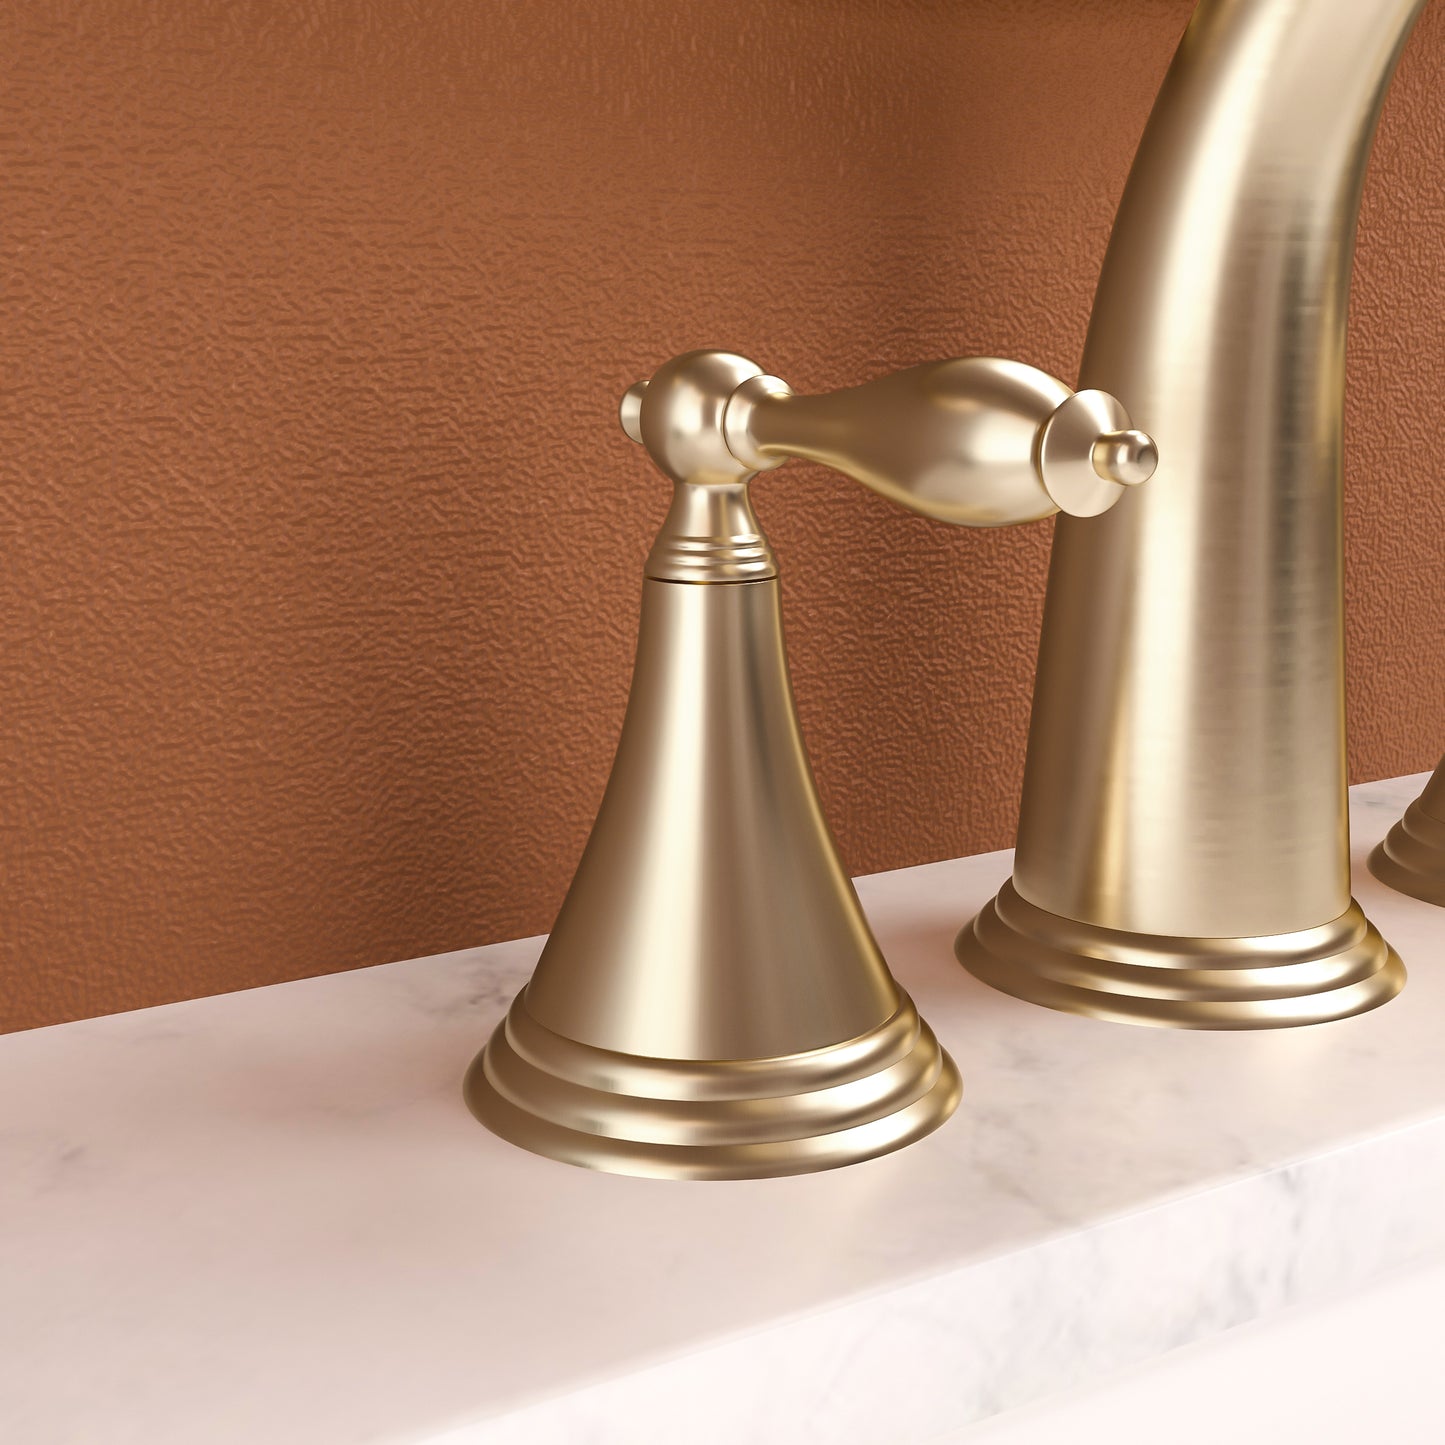 Gold Widespread Bathroom Faucet with Two Handles, Pop-Up Drain, and Water Supply Lines